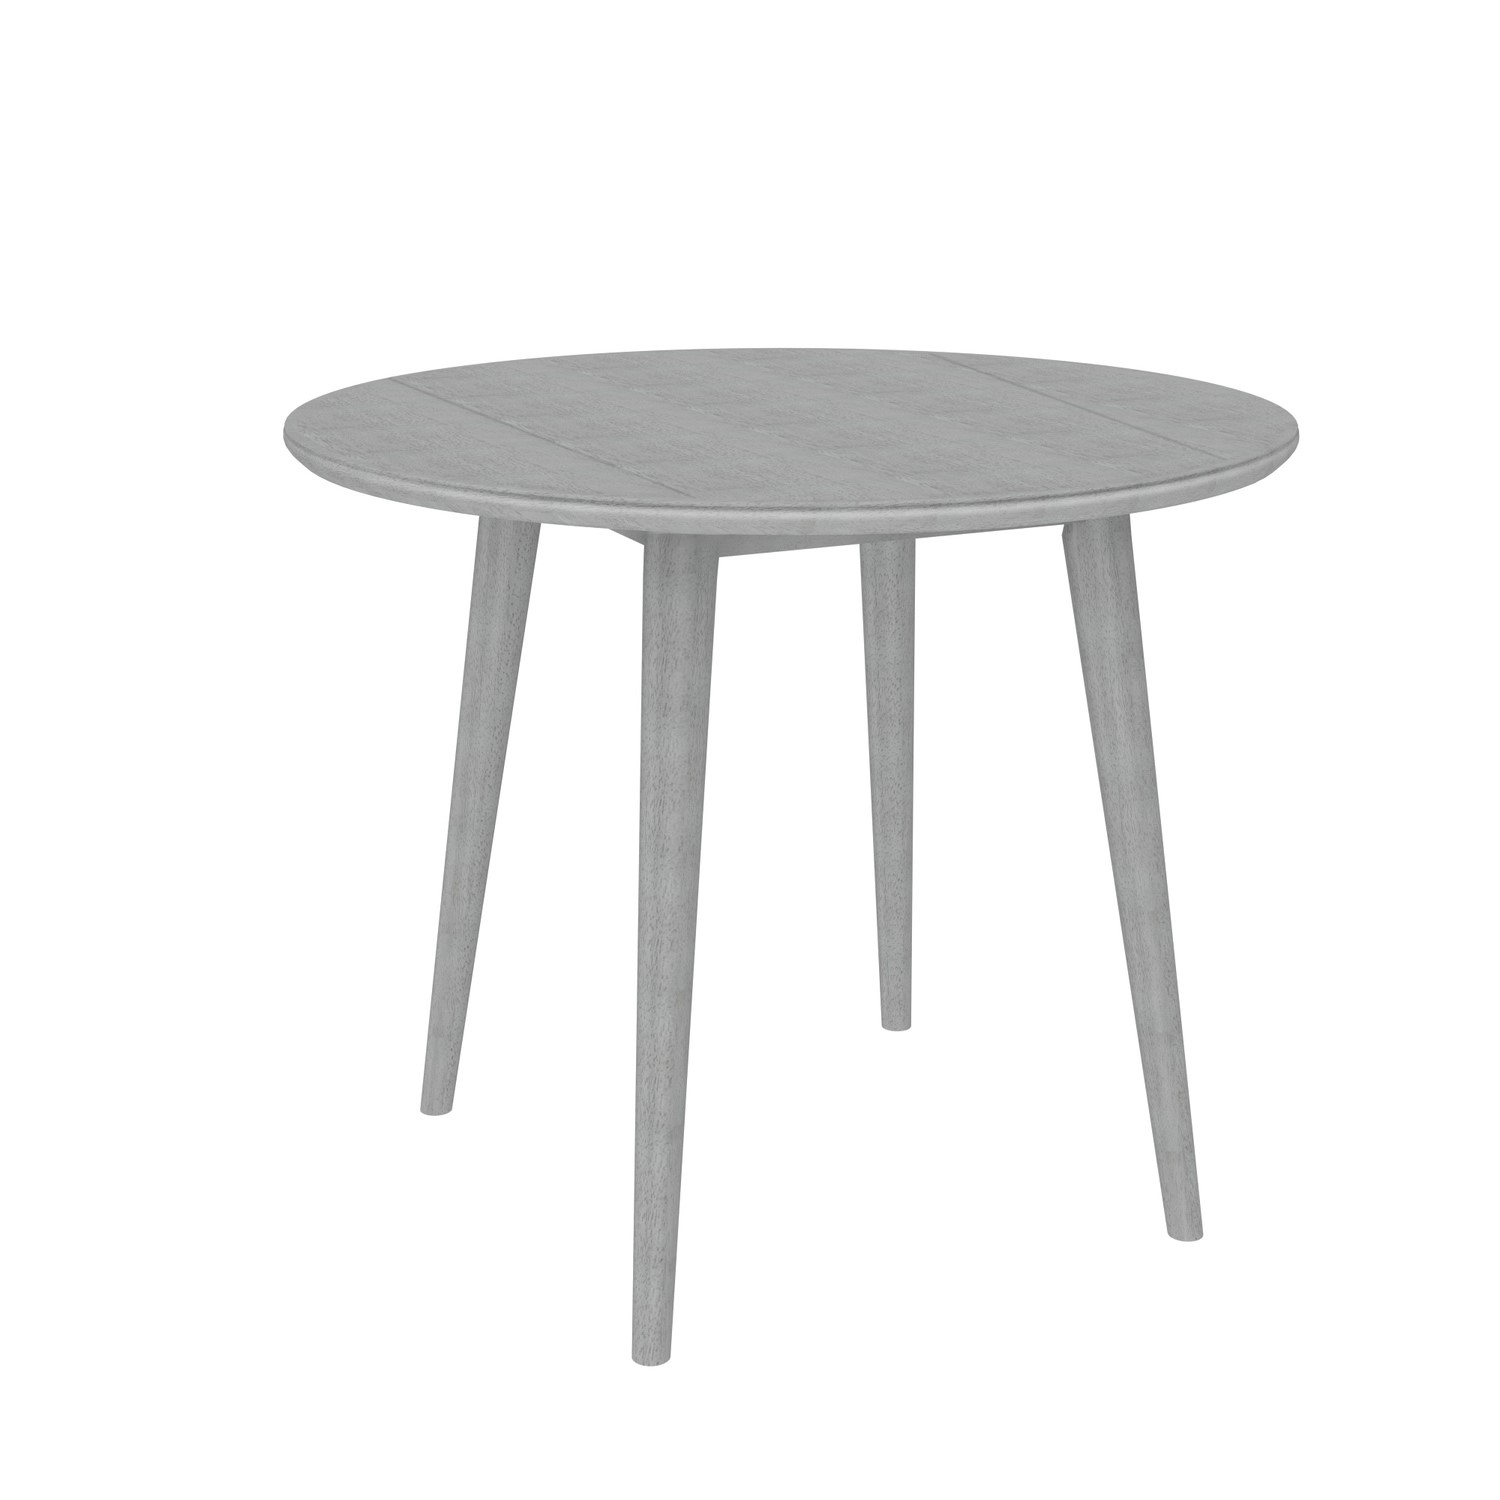 Seats 4 Cami Round Drop Leaf Dining Table in Grey